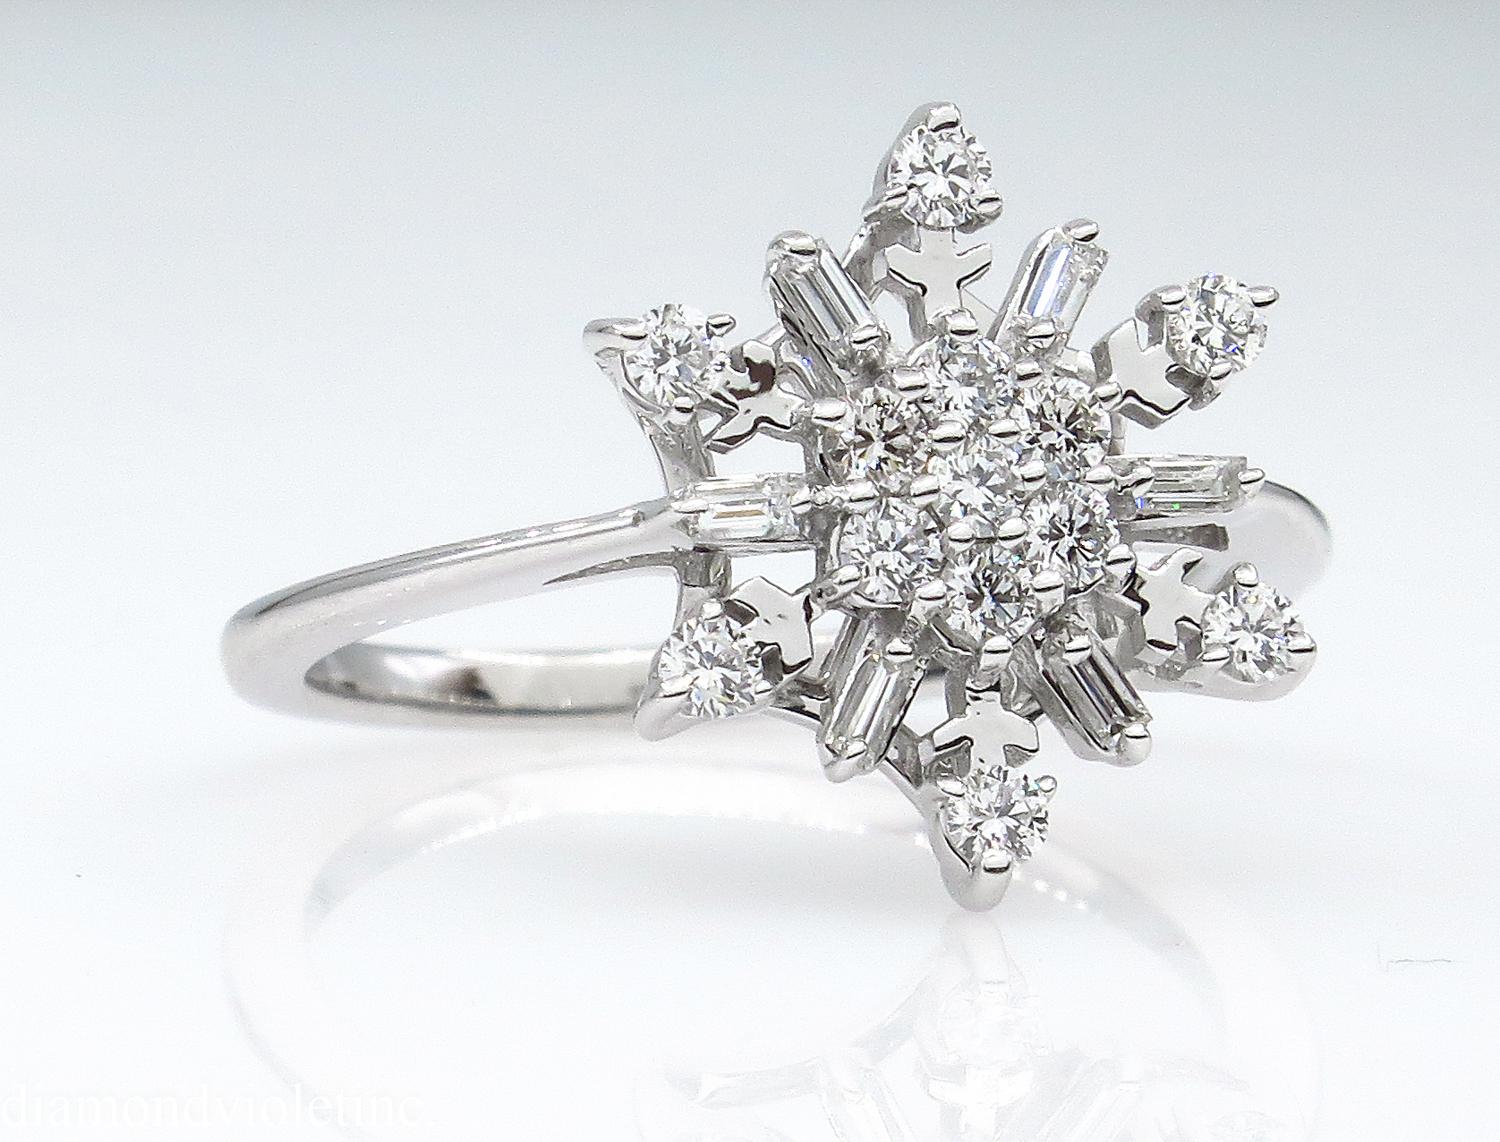 A wonderful Estate Diamond Cocktail Snowflake Cluster Ring in 14K White Gold (stamped), all Diamonds estimated as 0.50CT in F-G color, VS-SI clarity. White and so BRILLIANT and Sparkly that you won't notice some few natural imperfections that the